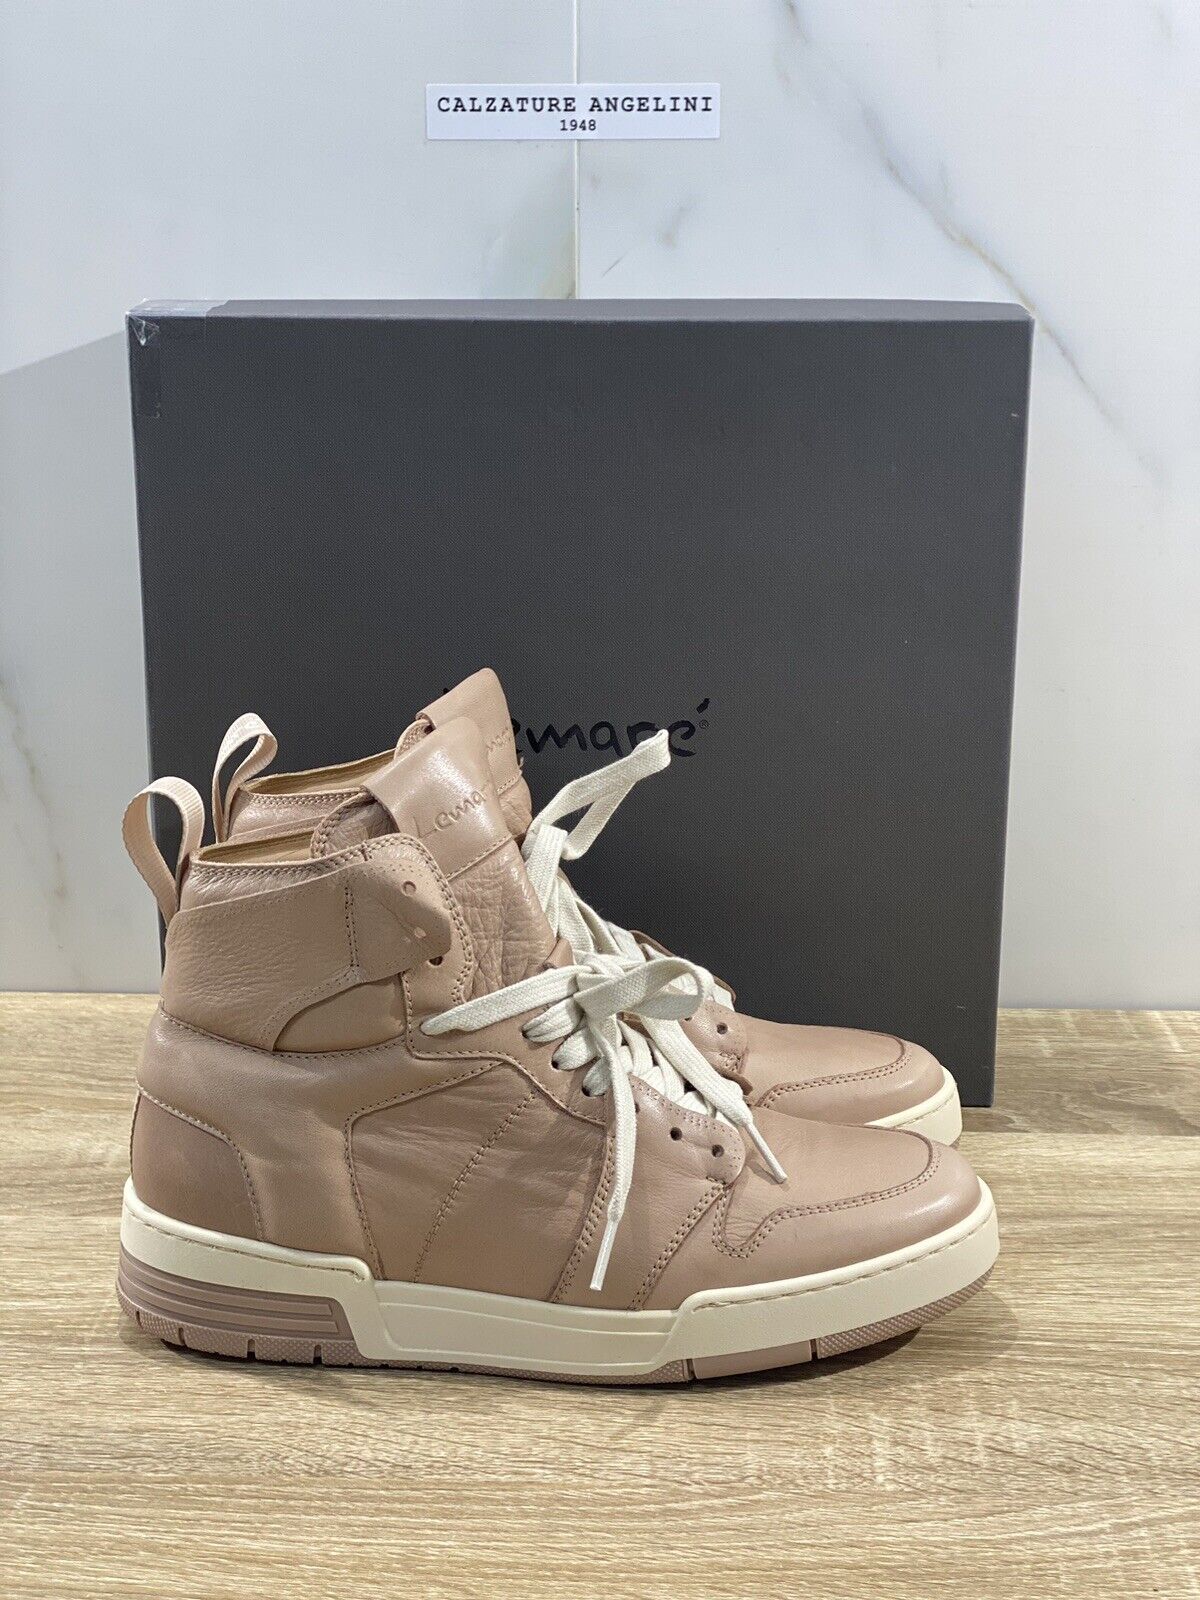 Lemare’ sneaker donna 3013 hi top pelle nude fondo gomma casual shoes 37